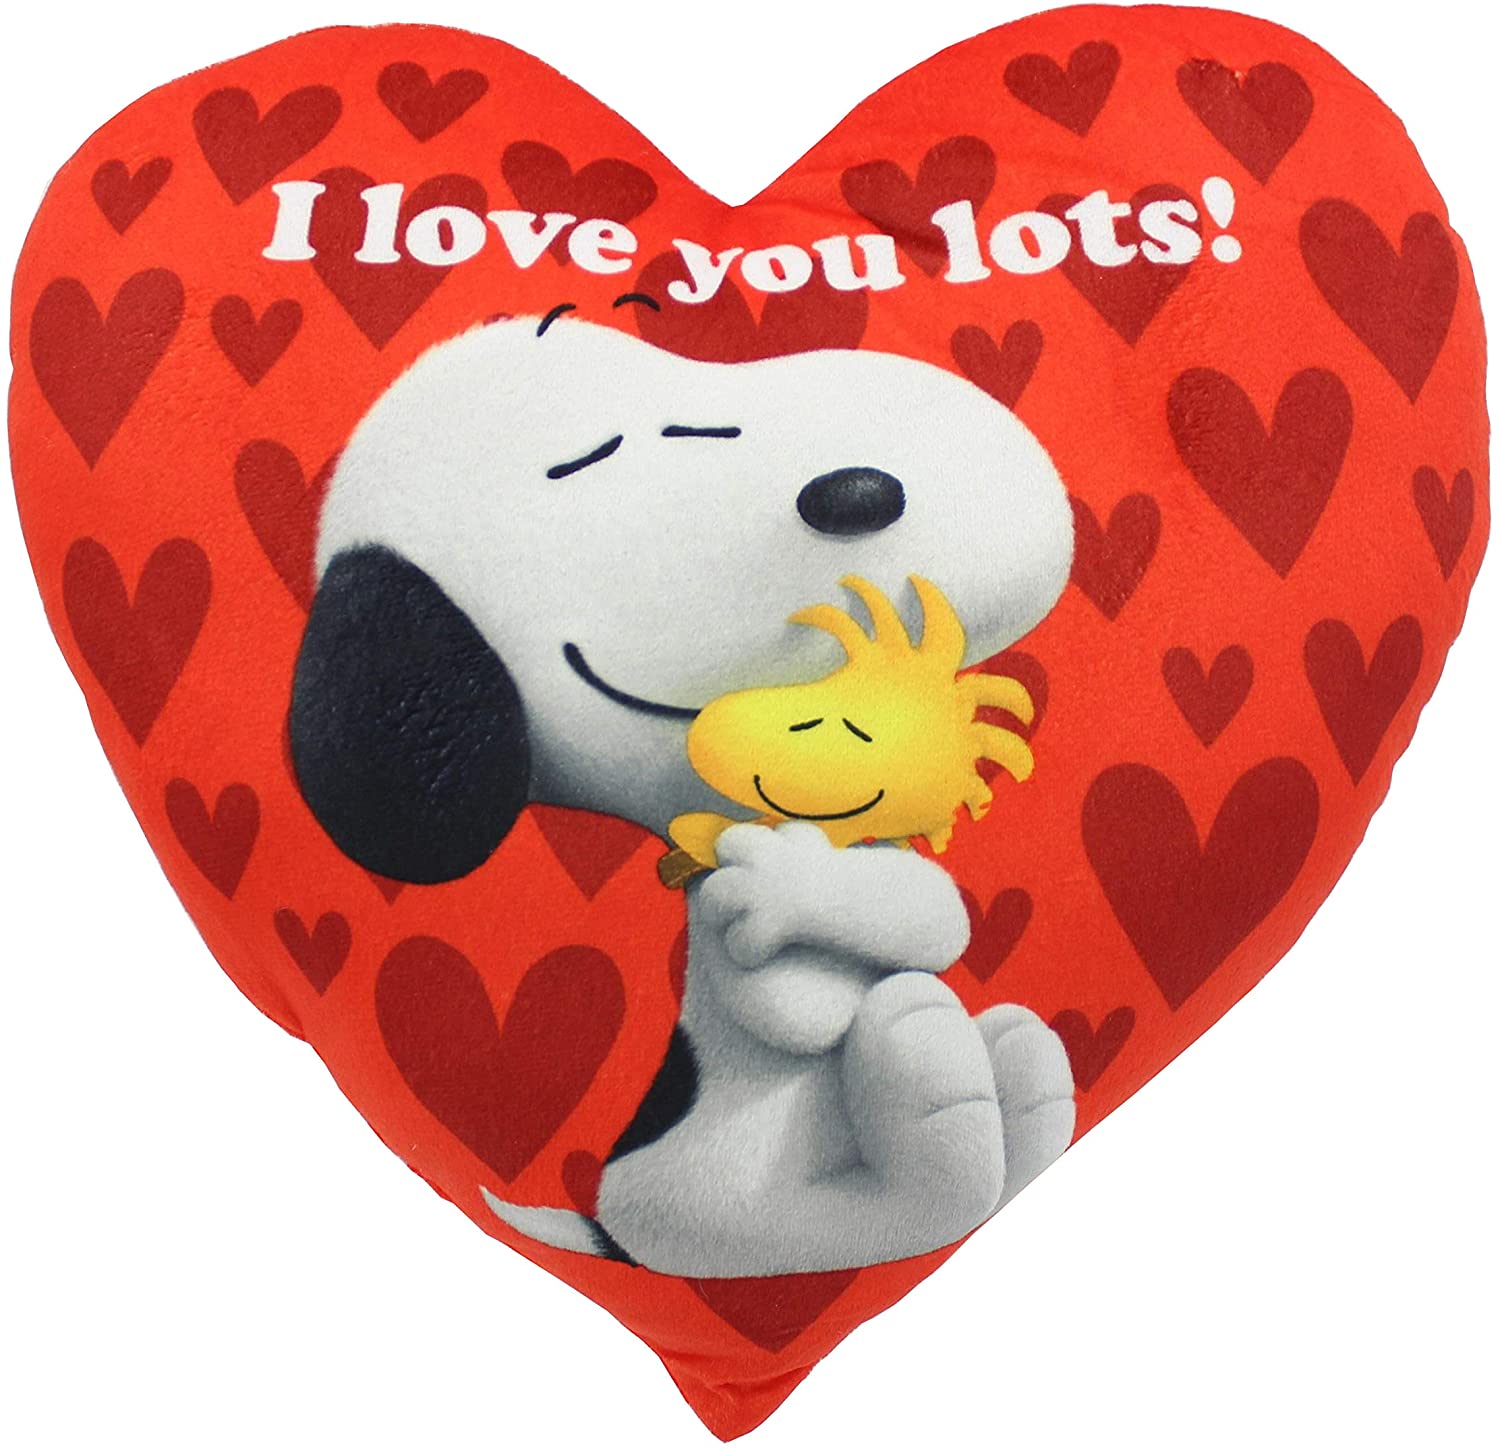 Peanuts Valentine's Snoopy And Woodstock 14" I Love You Lots Red Heart Pillow